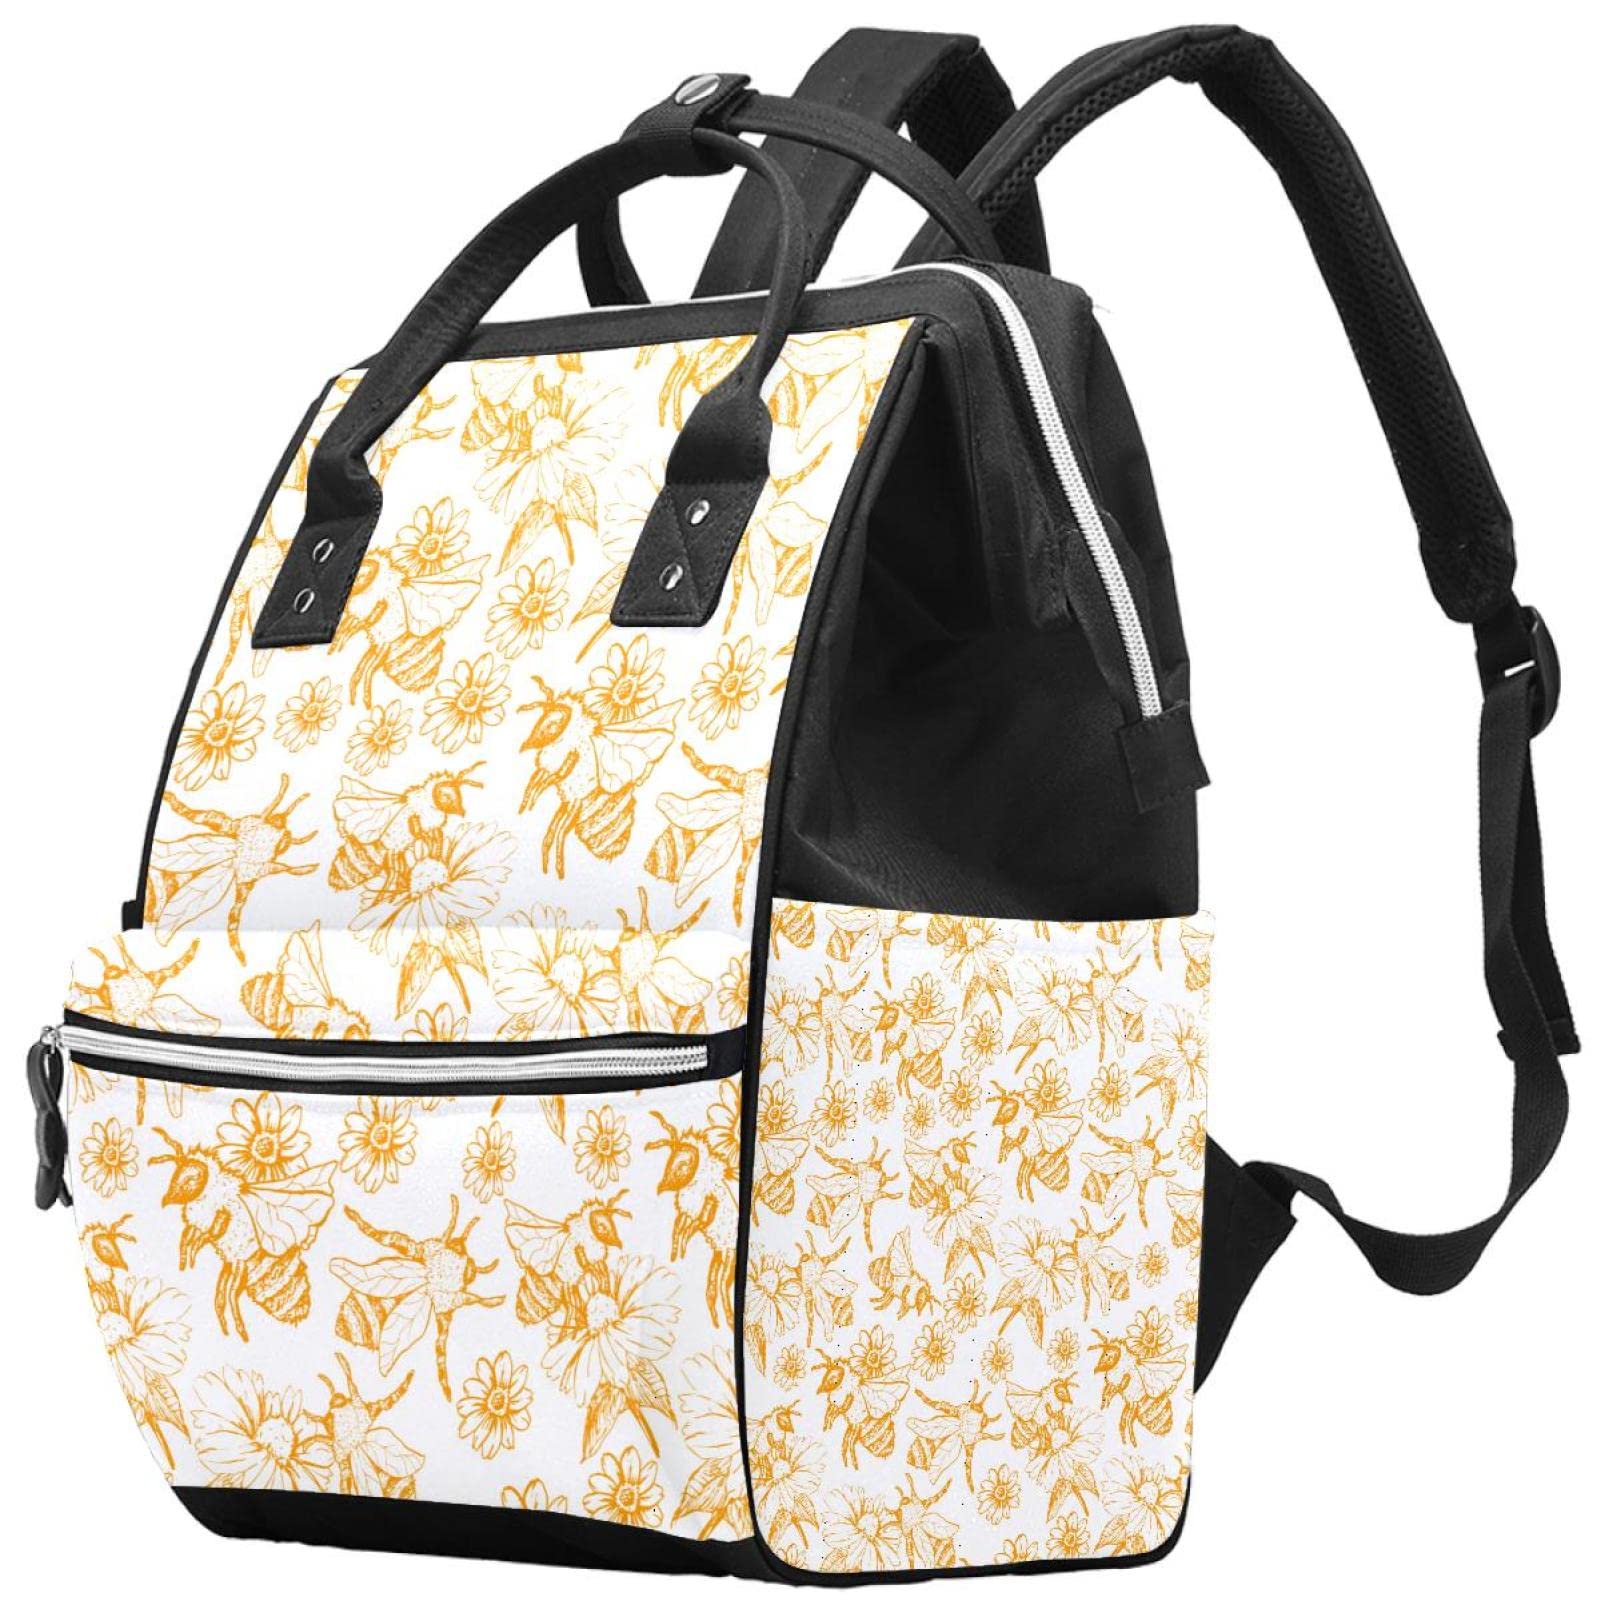 Ofdojg Honey Bee Diaper Bag Backpack Baby Nappy Changing Bags Multi Function Large Capacity Travel Bag